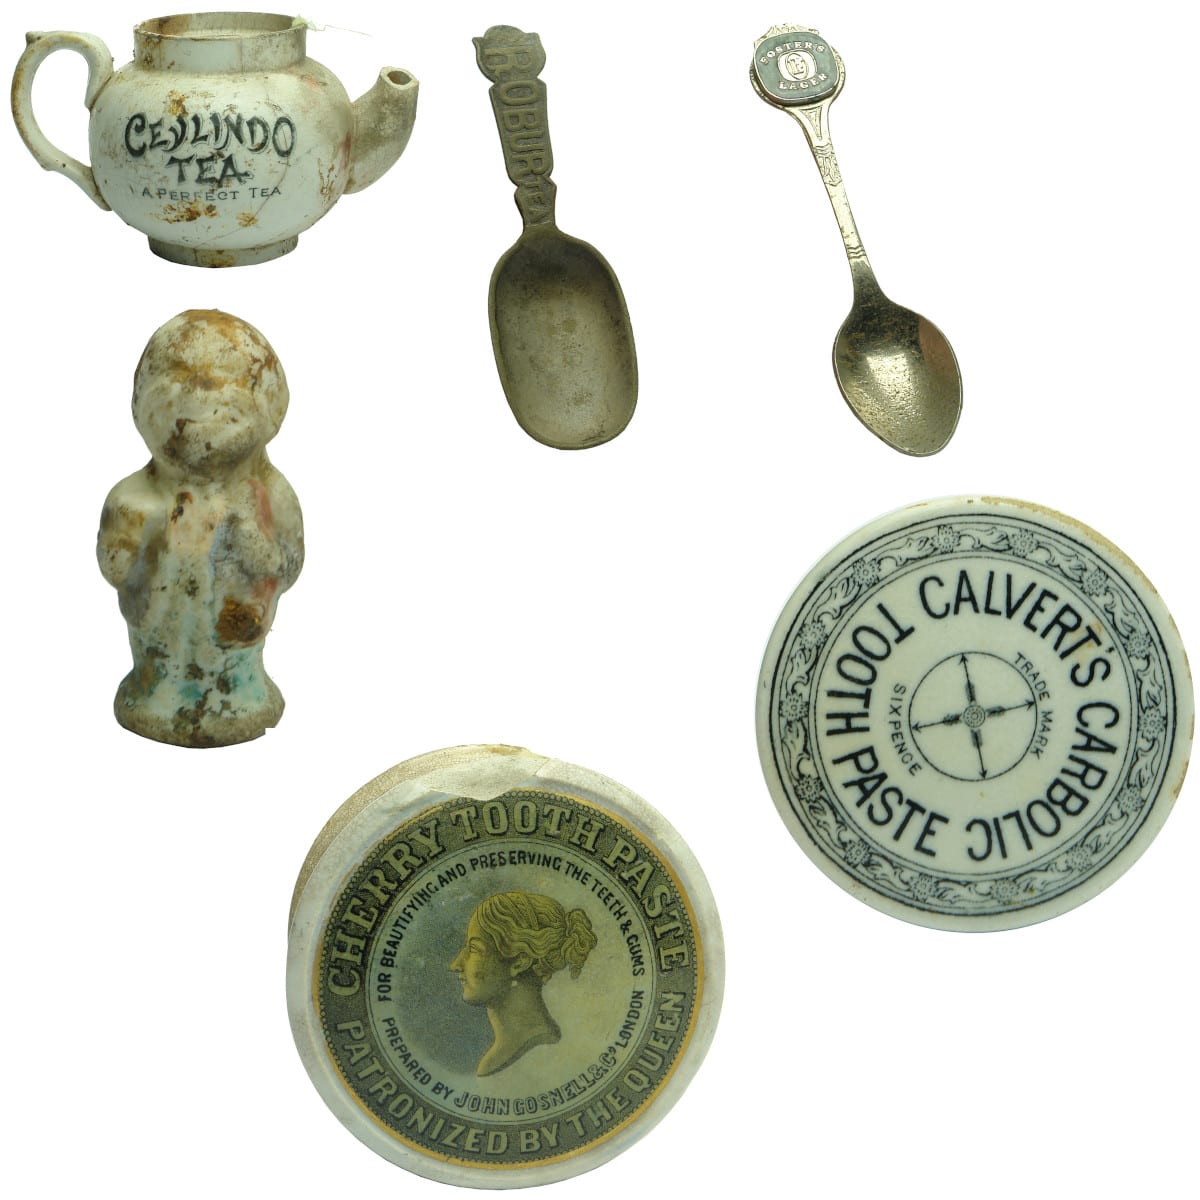 6 Mixed Items: Teapot. Ceylindo Tea. Spoons: Robur Tea & Fosters Lager; Calverts and Queens Head Pot Lids; Jolly Man Doll.